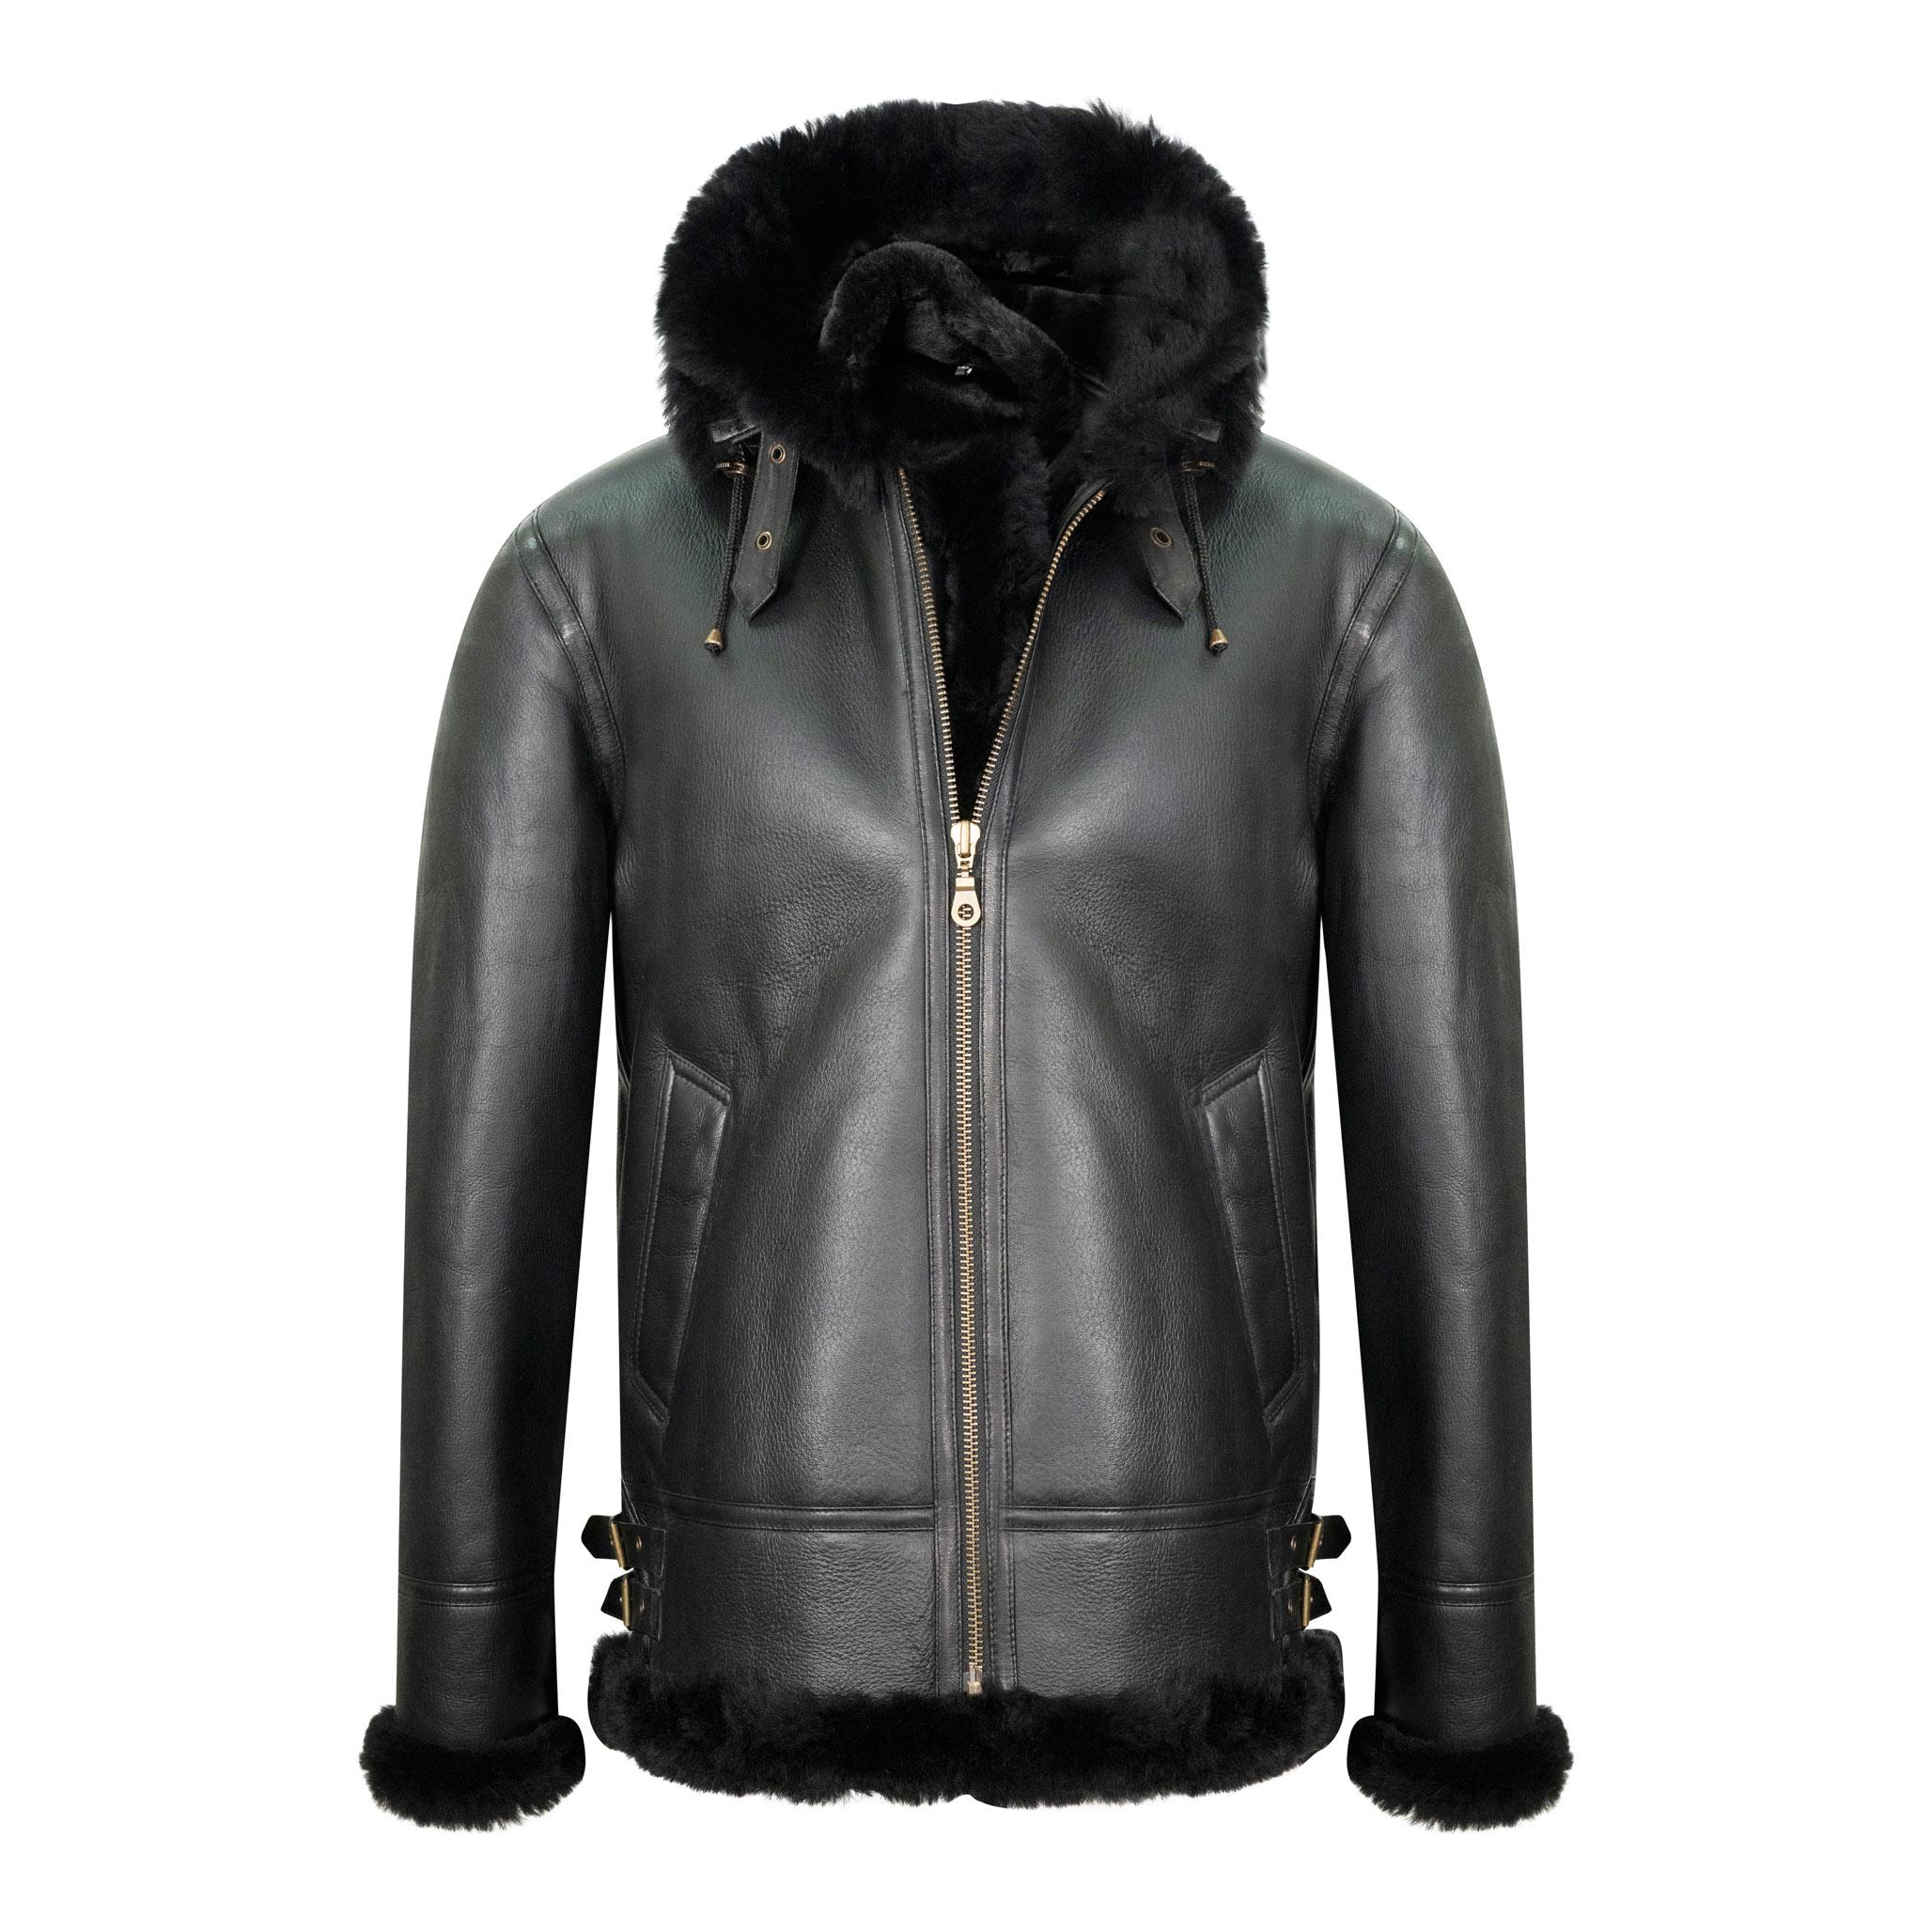 A black mens sheepskin jacket with a hood. The outer leather features a sleek finish, with thick black inner fur.